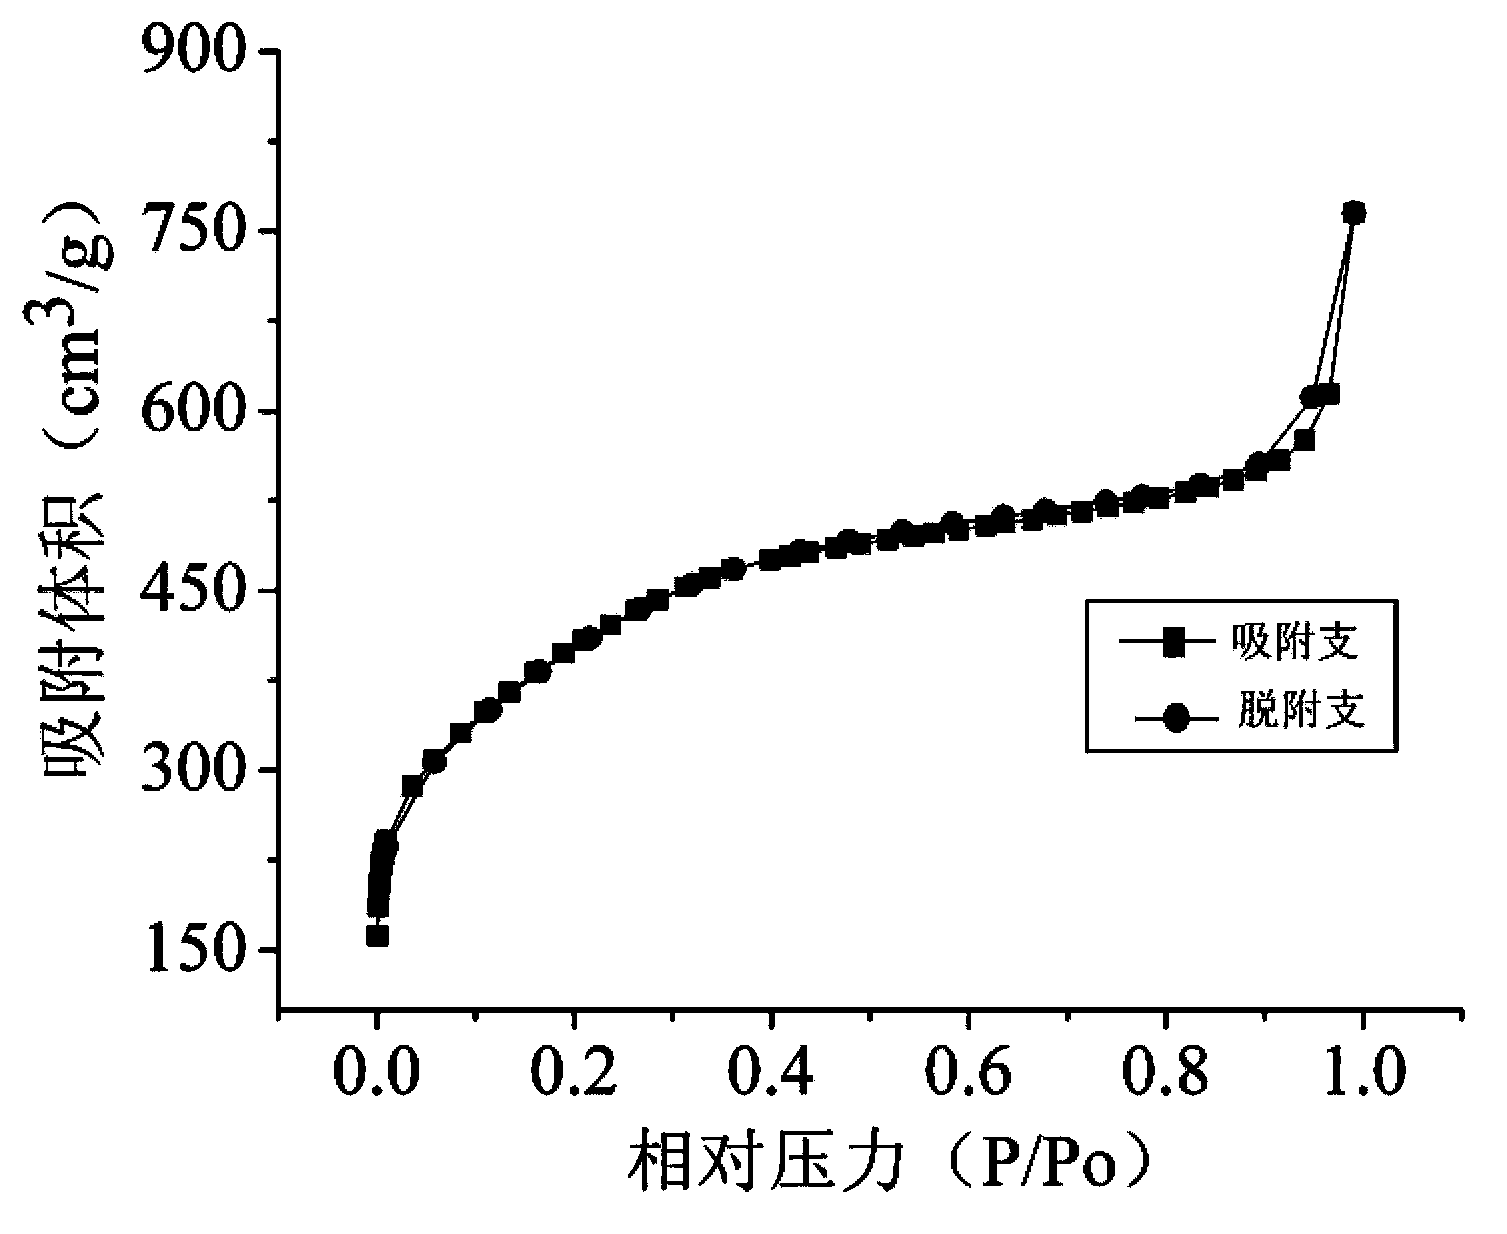 Mesoporous carbon material high in specific surface area and rich in oxygen surface functional groups, and preparation method thereof